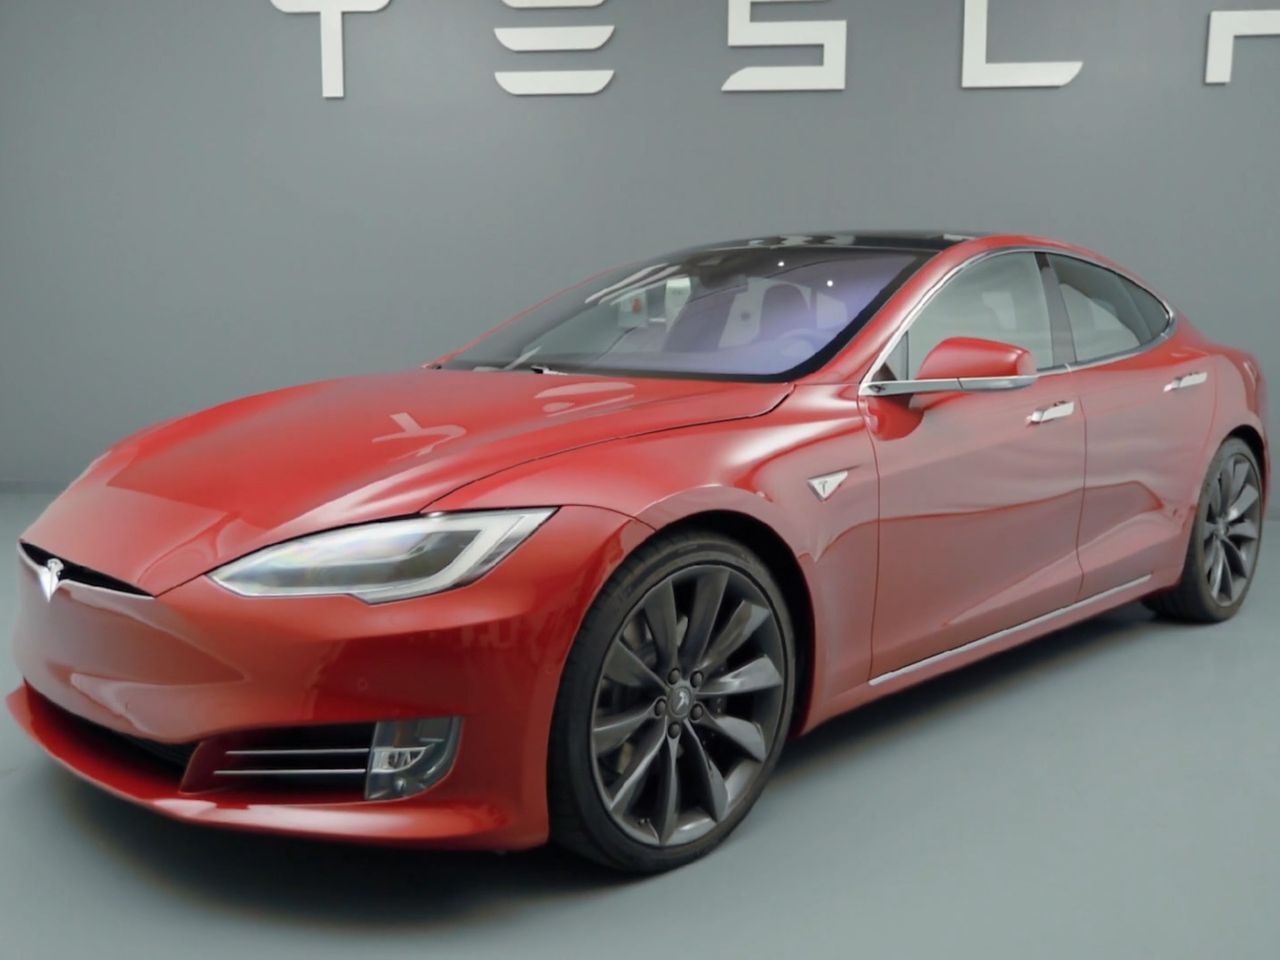 consumer-reports-names-tesla-the-top-american-car-brand